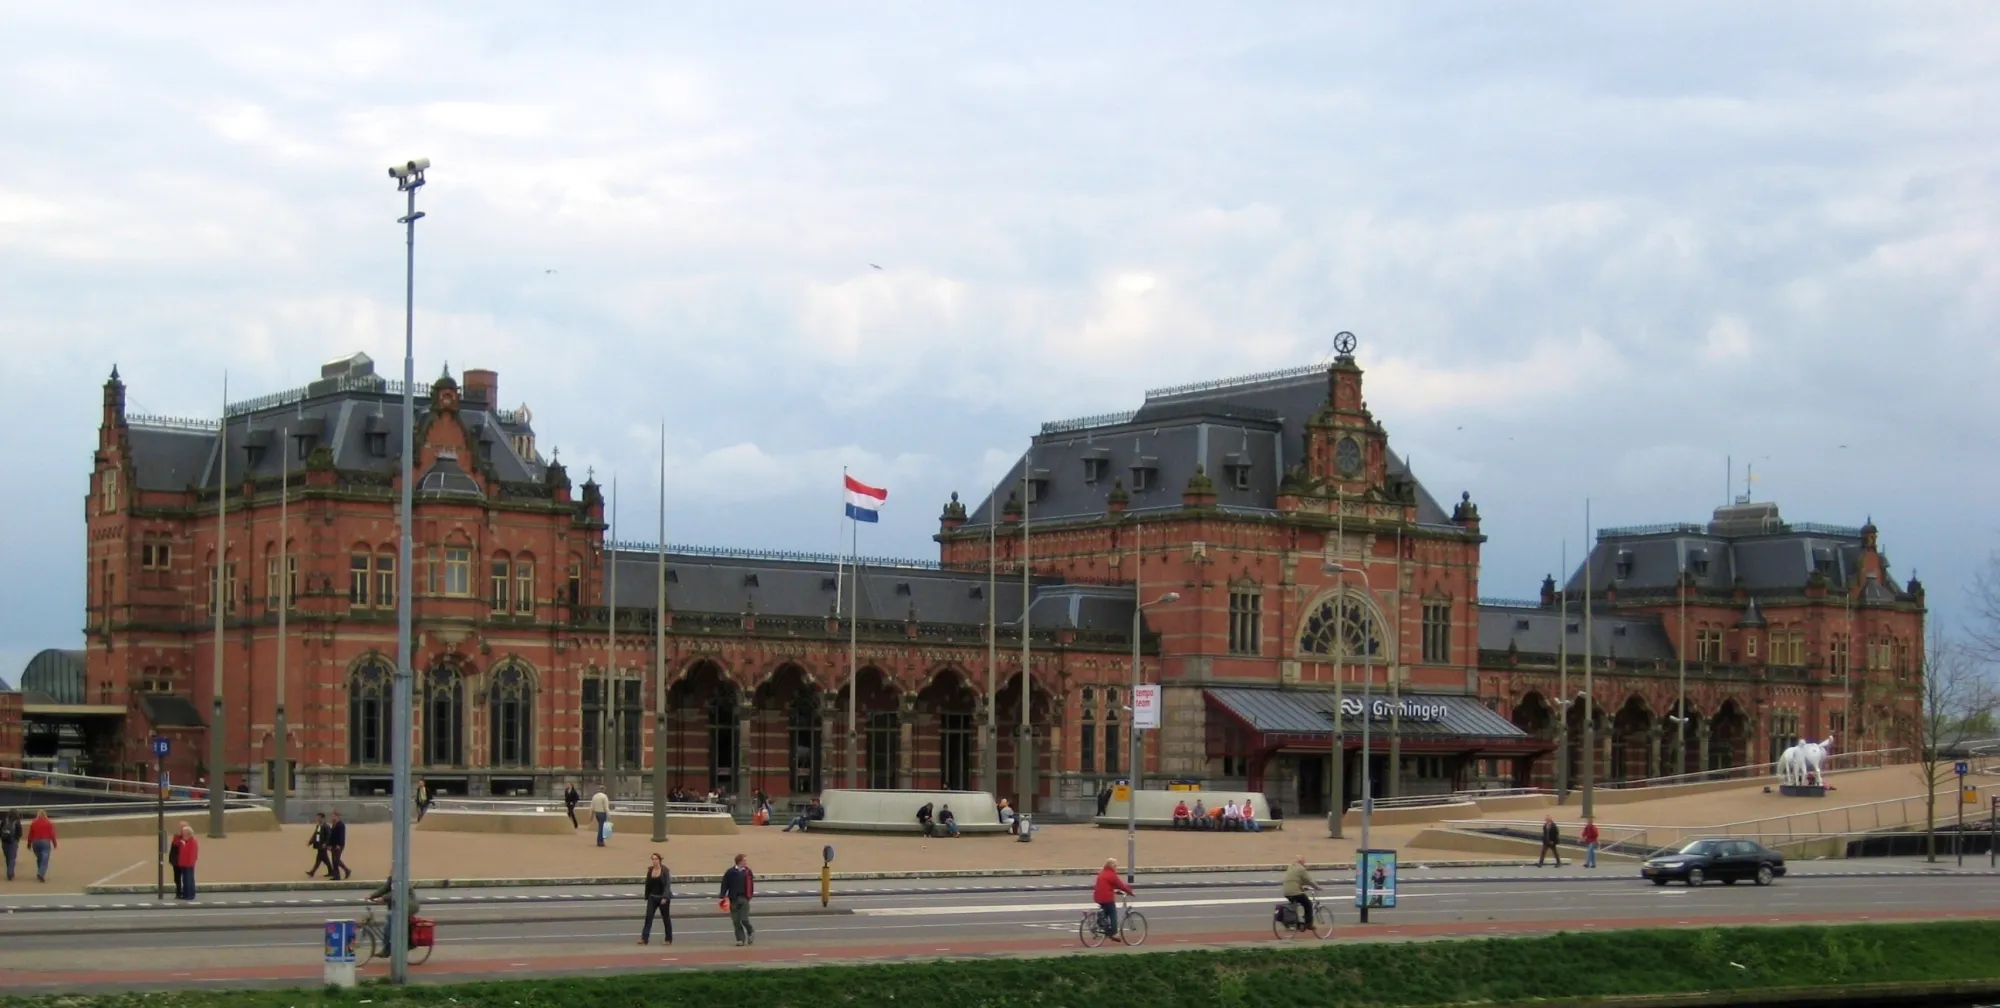 Photo showing: The main train station of the Dutch city of Groningen.